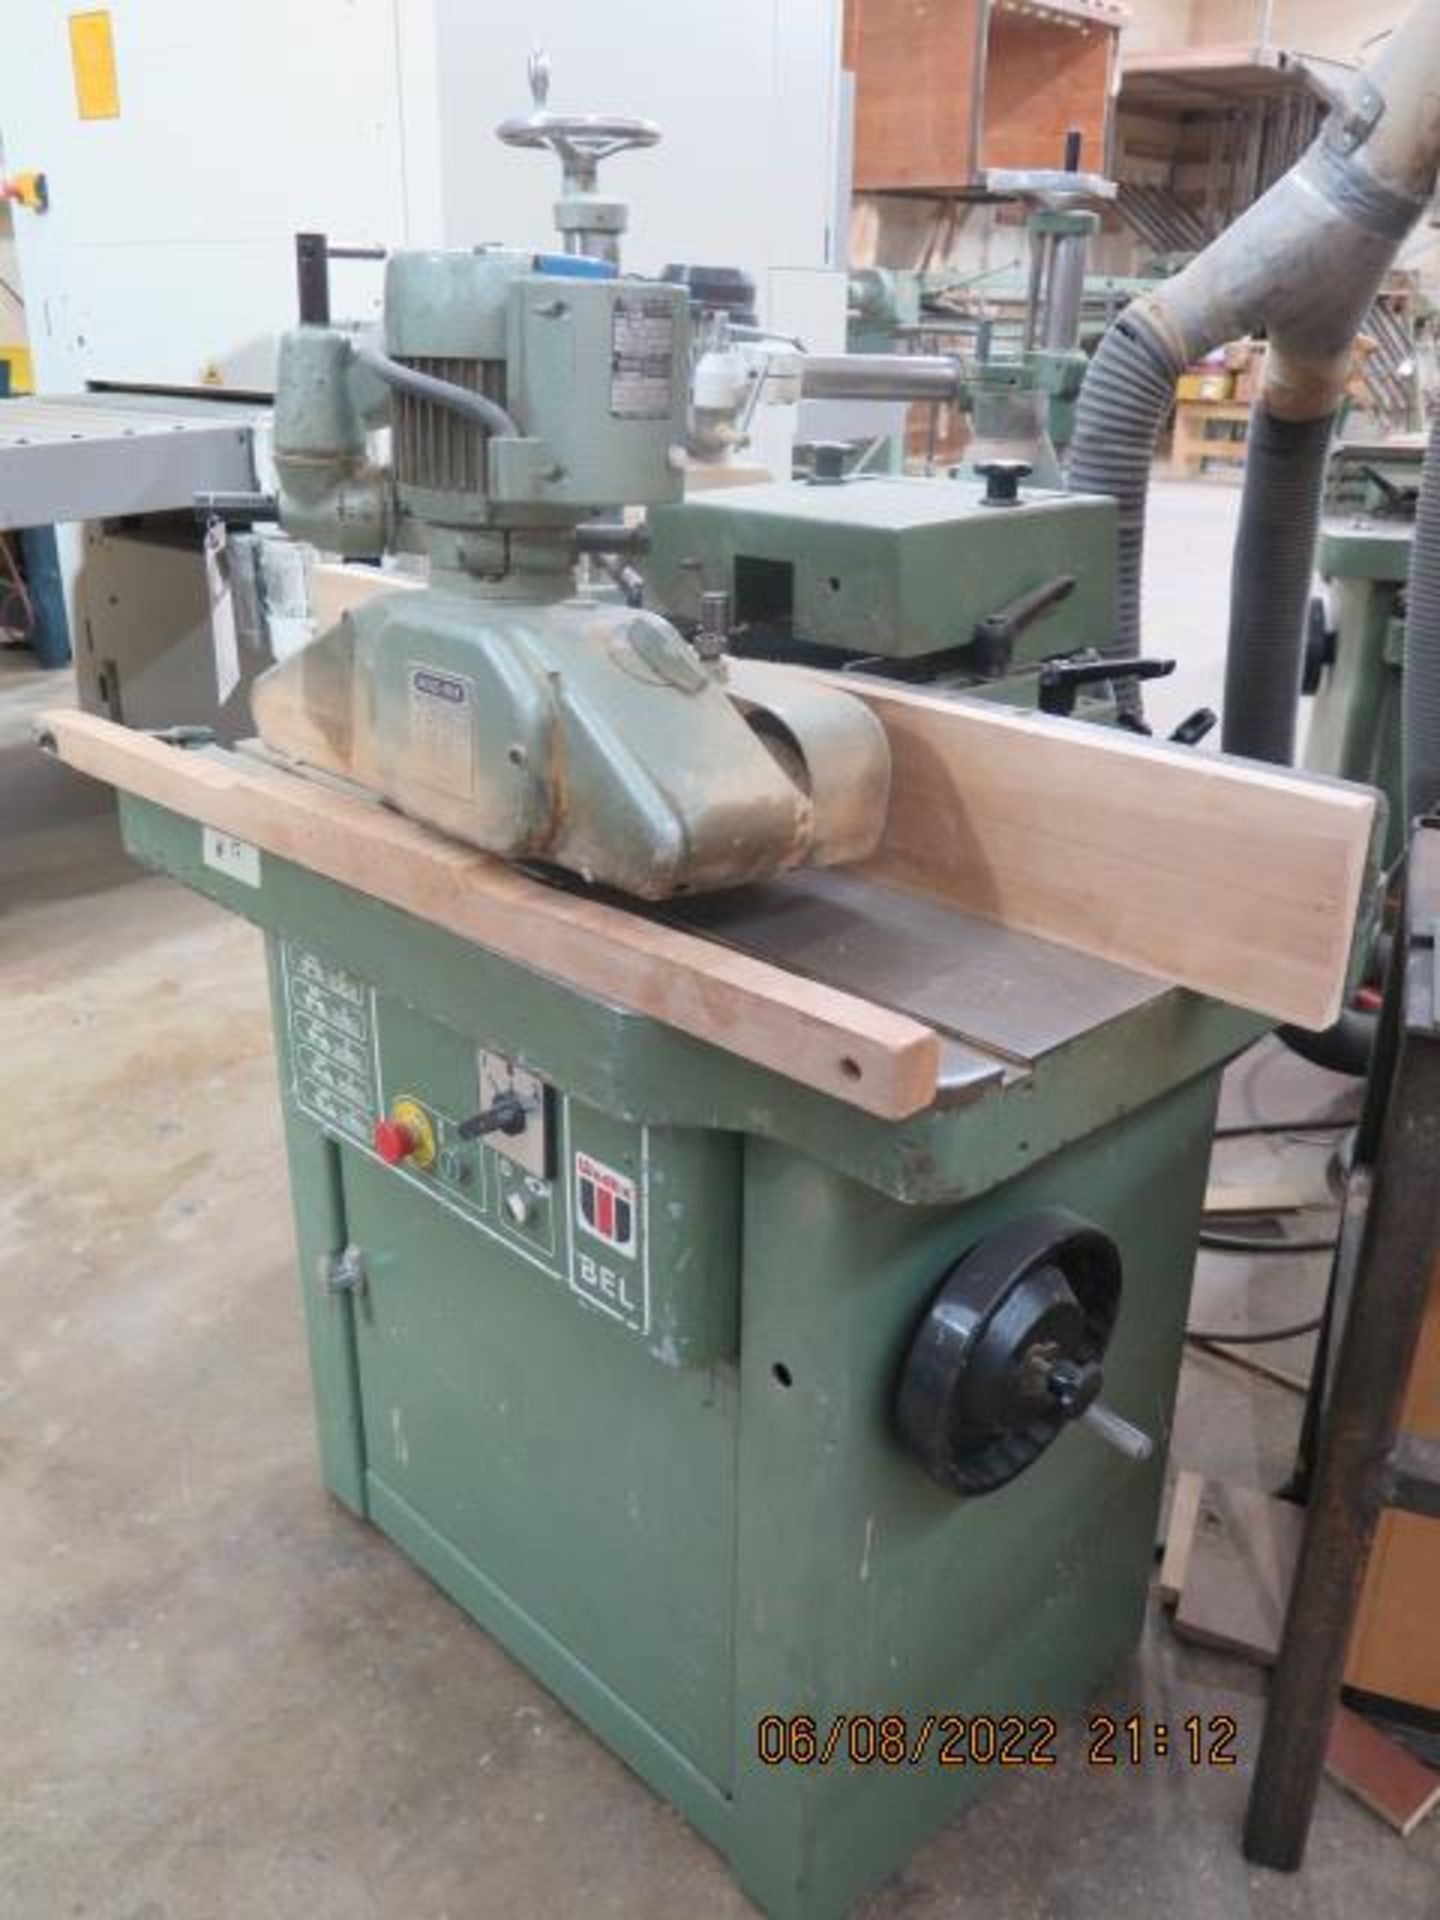 Wadkin BEL Spindle Shaper s/n 930 w/ 3000-10,000 RPM, HolzHer 4-Roll Power Feeder (SOLD AS-IS - NO - Image 3 of 12